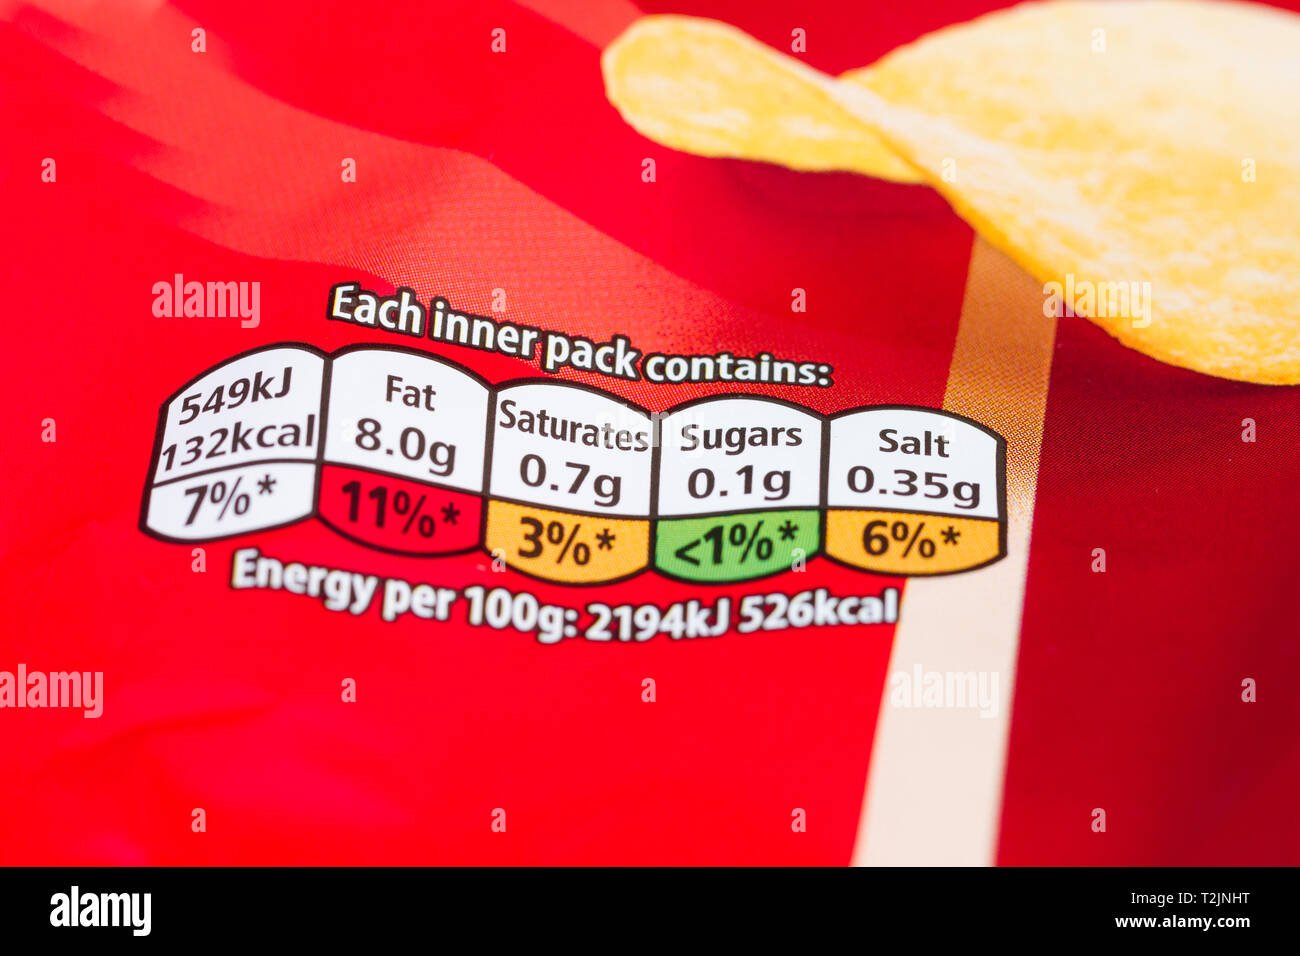 Nutritional information food label on a multi-pack of Walkers ready salted crisps Stock Photo